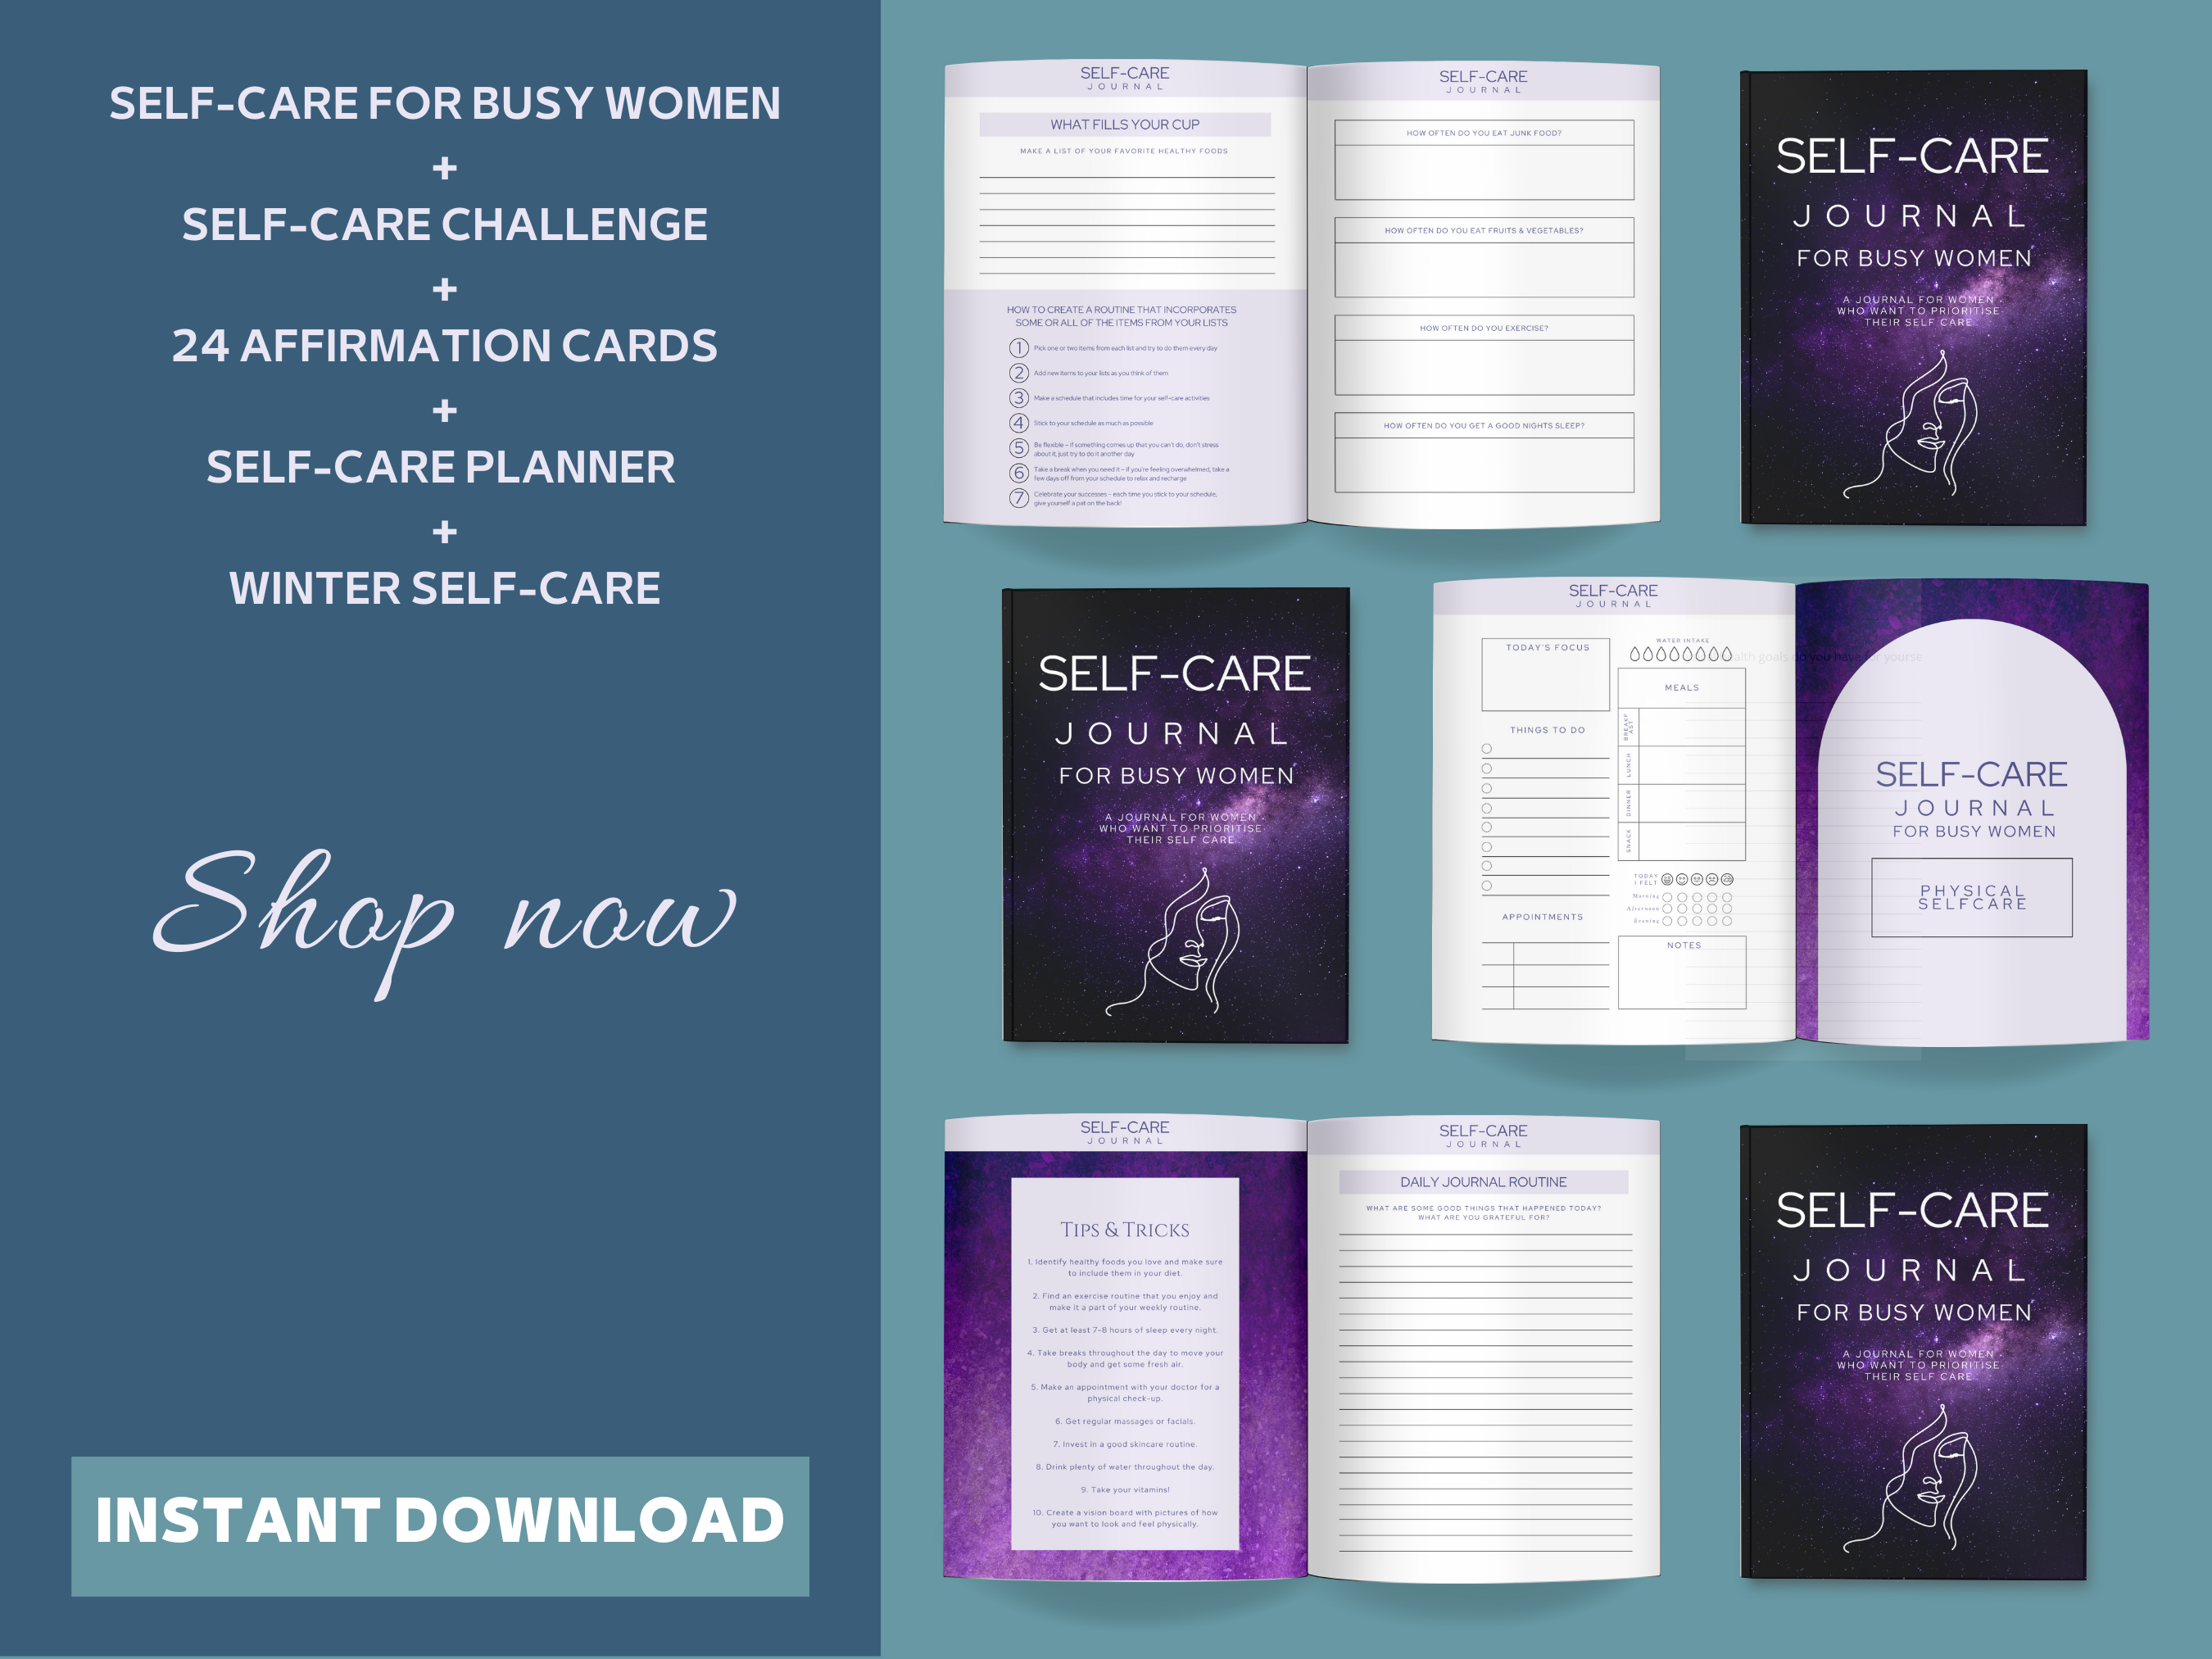 Empowering Self-Care Practices for Busy Women: Prioritizing Wellness in a Hectic World